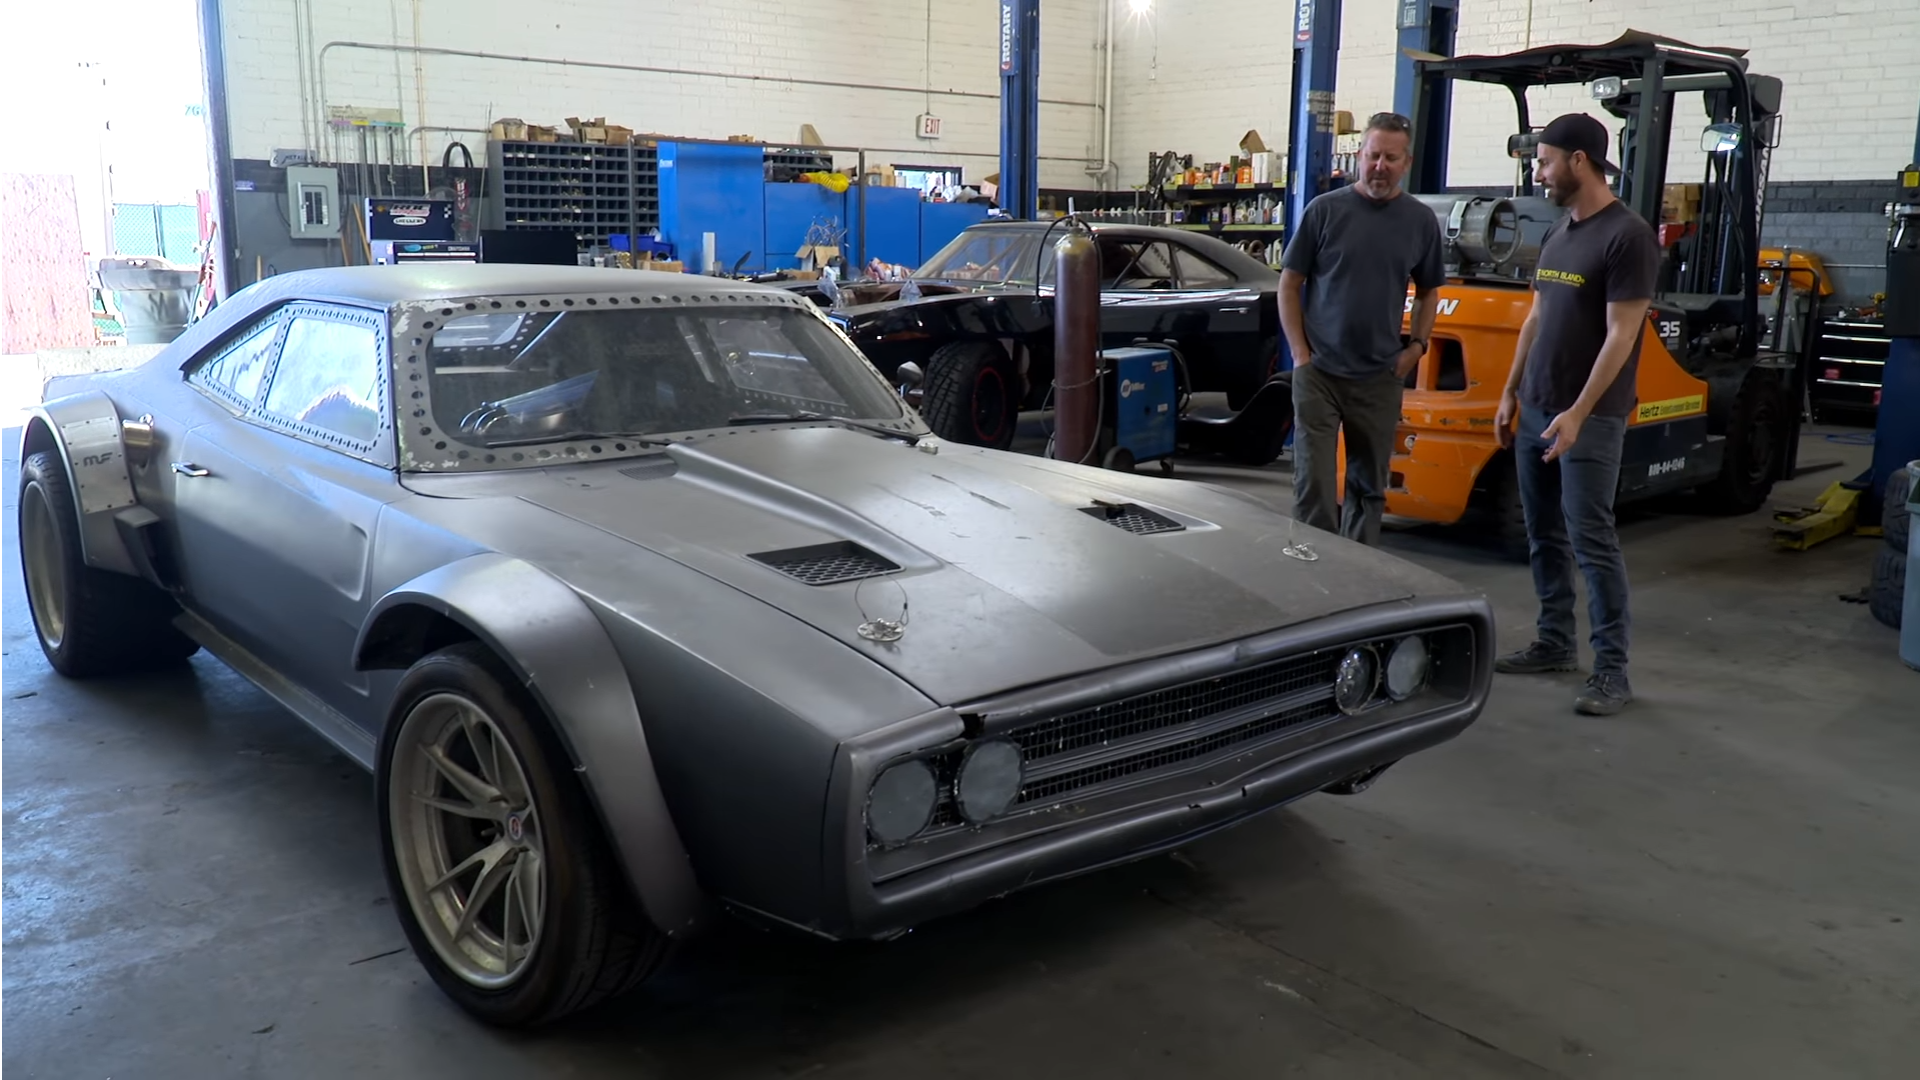 ‘Fast And Furious 8’ Car Builder Dennis McCarthy Takes Us Around Dom’s Dodge ‘Ice’ Charger, Lettie’s ’65 Vette And More